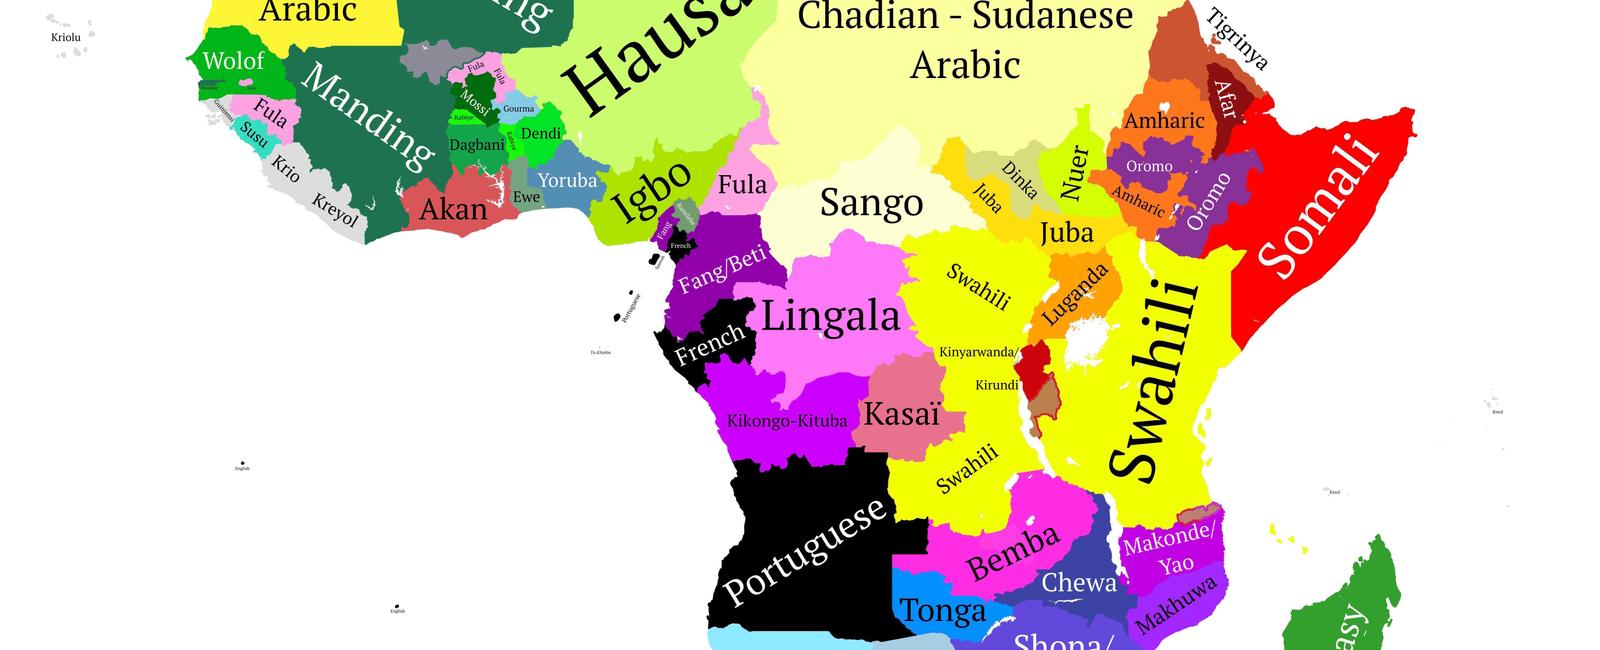 About 2 3 of all languages are from asia and africa